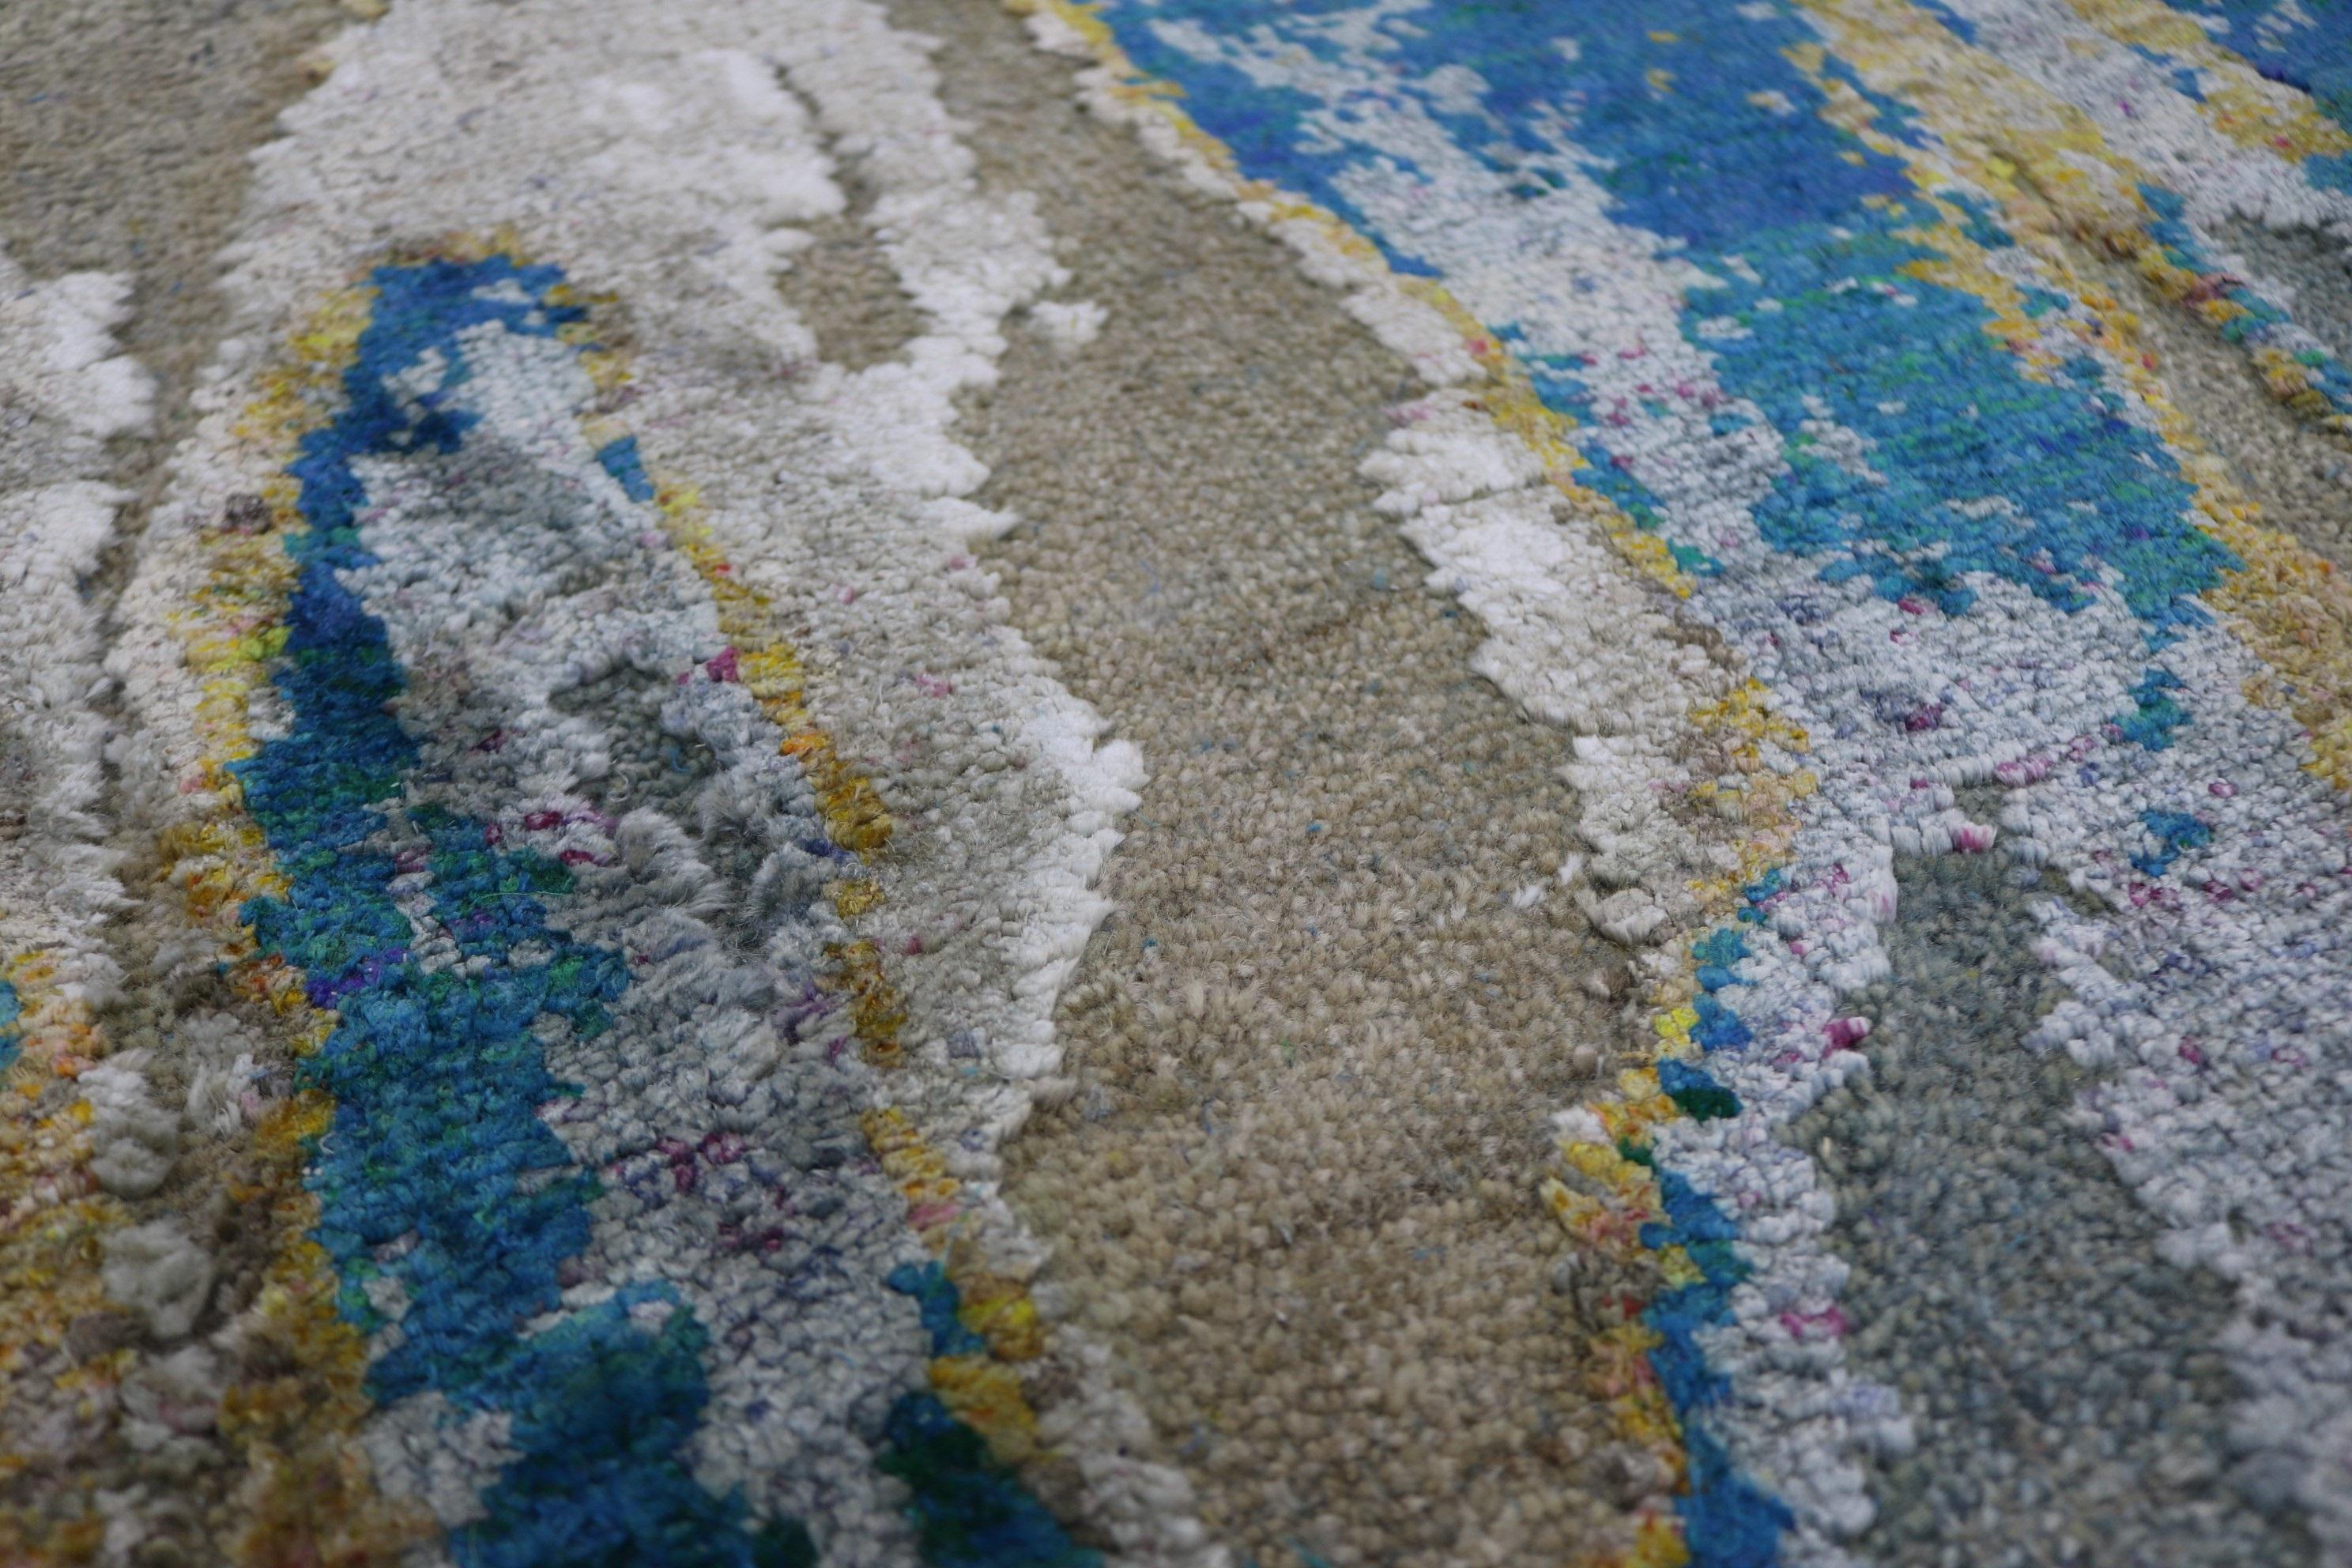 The Odyssey collection a breakthrough, three dimensional and multi textural rug collection, inspired by NASA imagery. Distressed wool and natural silk are hand-knotted to create three levels of visual and tactile finery. The collection pairs vintage